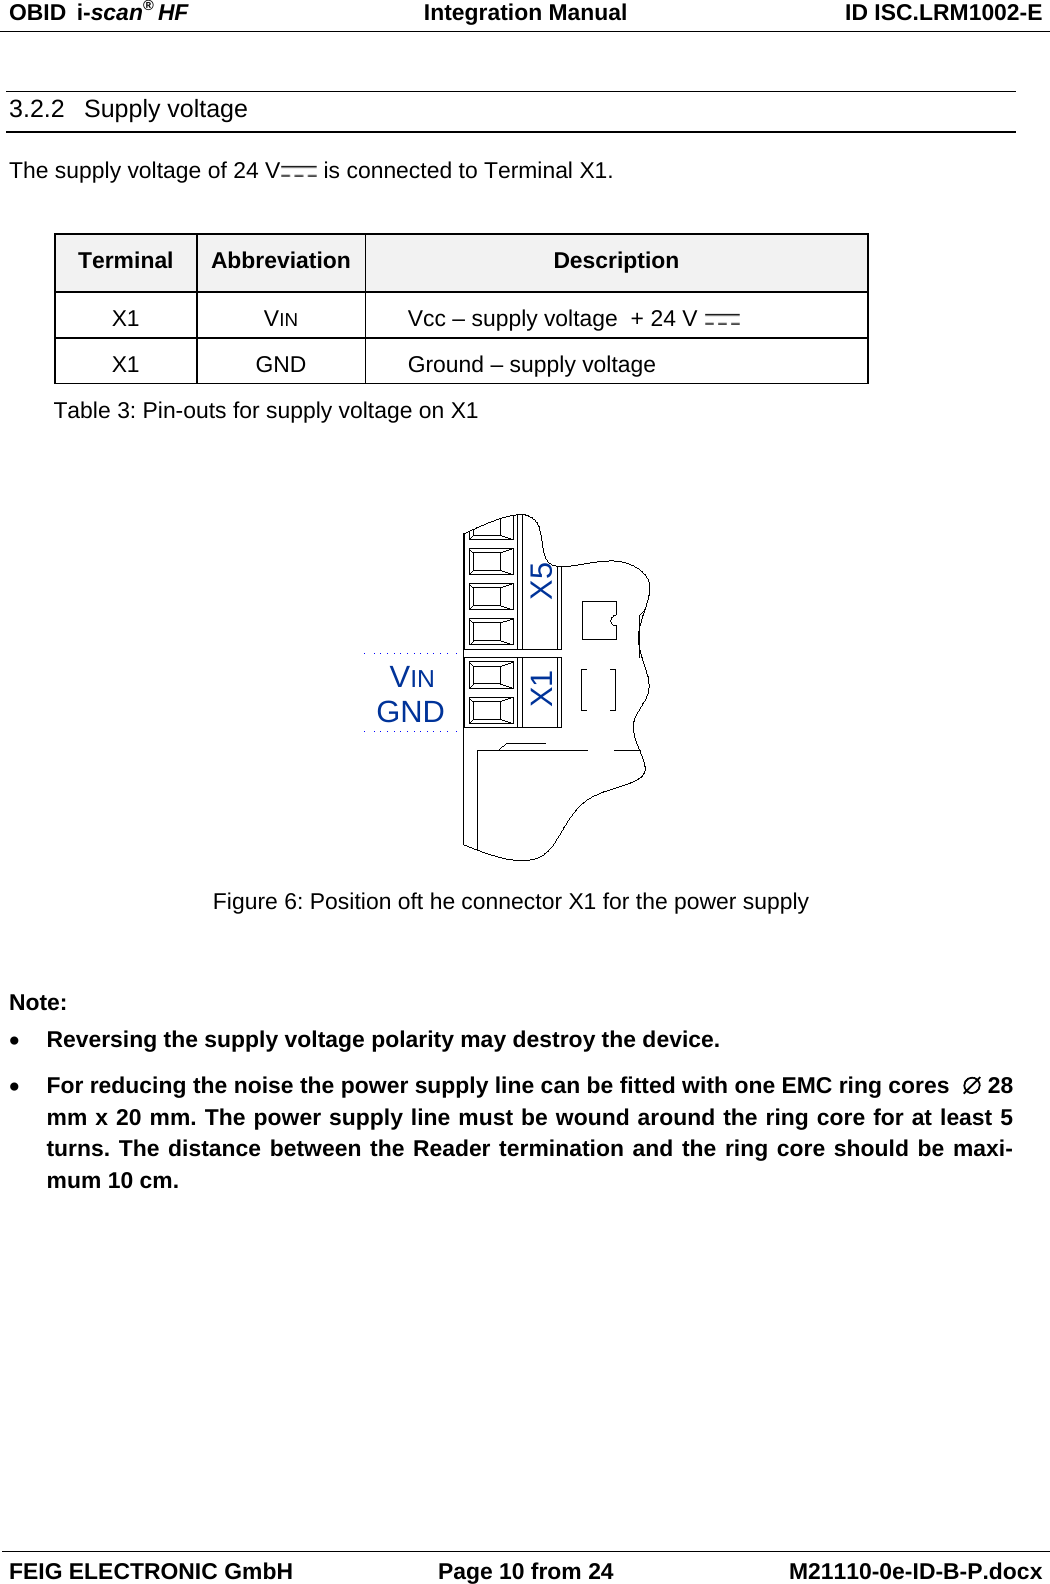 OBID  i-scan® HF Integration Manual ID ISC.LRM1002-E  FEIG ELECTRONIC GmbH Page 10 from 24 M21110-0e-ID-B-P.docx  3.2.2 Supply voltage The supply voltage of 24 V  is connected to Terminal X1.  Terminal Abbreviation Description X1  VIN Vcc – supply voltage  + 24 V   X1 GND Ground – supply voltage Table 3: Pin-outs for supply voltage on X1  GNDVINX1 X5 Figure 6: Position oft he connector X1 for the power supply  Note: • Reversing the supply voltage polarity may destroy the device. • For reducing the noise the power supply line can be fitted with one EMC ring cores  ∅ 28 mm x 20 mm. The power supply line must be wound around the ring core for at least 5 turns. The distance between the Reader termination and the ring core should be maxi-mum 10 cm.   